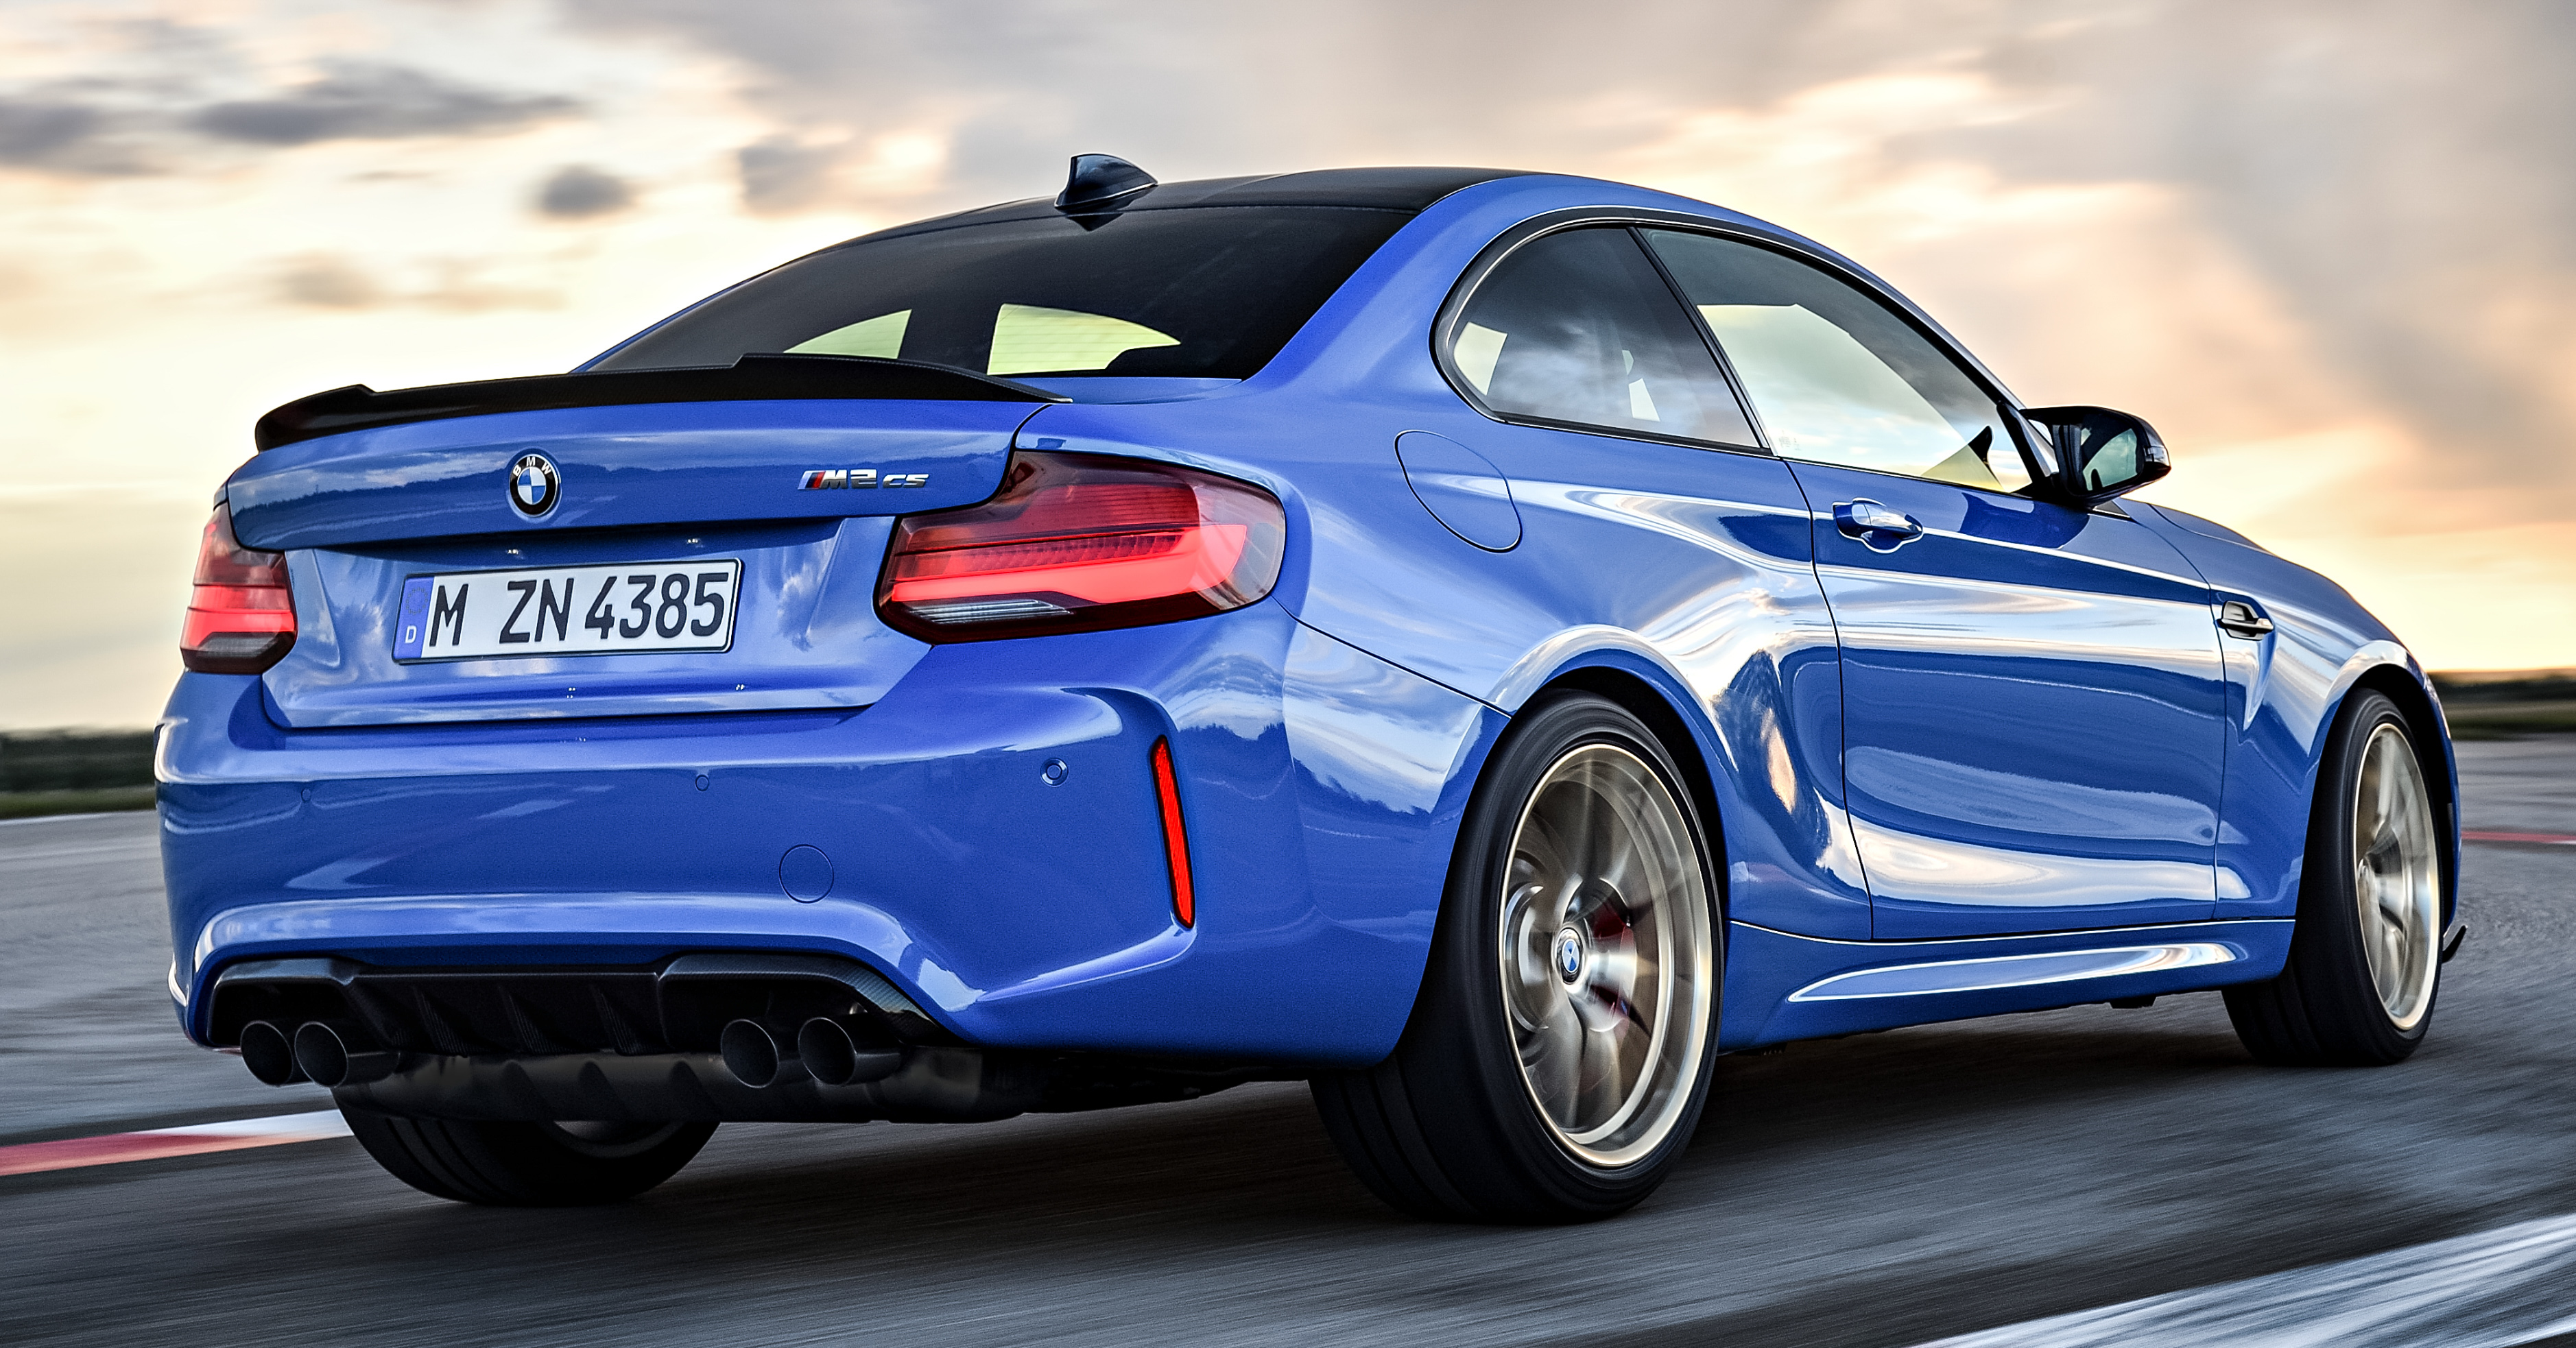 Новая bmw m. BMW m2 2020. BMW m2 Coupe. BMW m2 Coupe 2021. BMW m2 Coupe 2020.